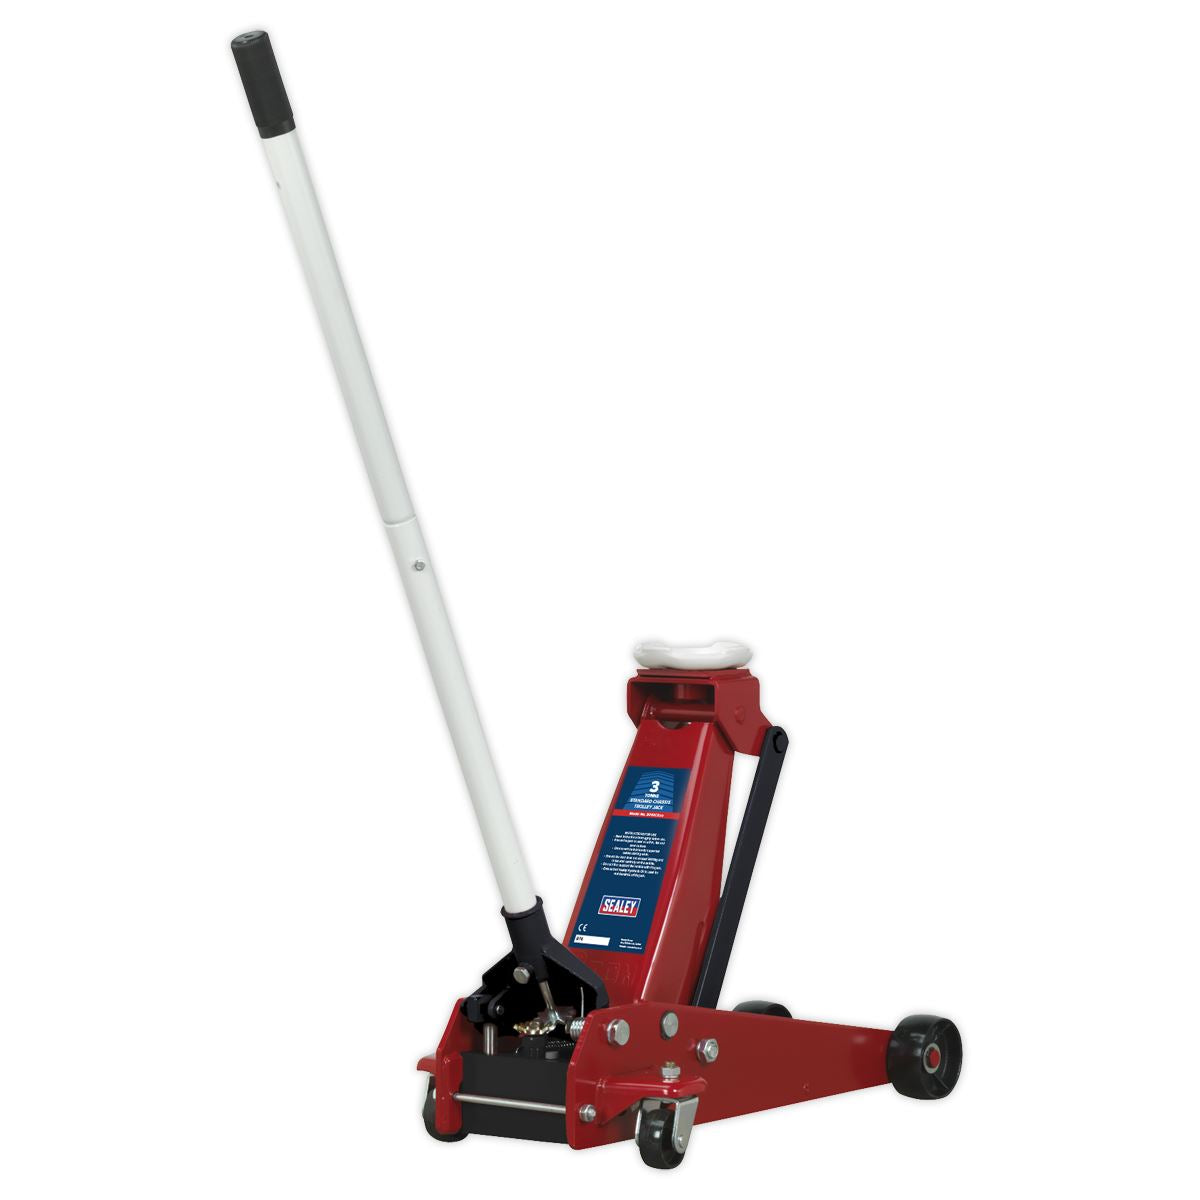 Sealey Standard Chassis Trolley Jack 3 Tonne with Axle Stands (Pair) 3 Tonne Capacity per Stand